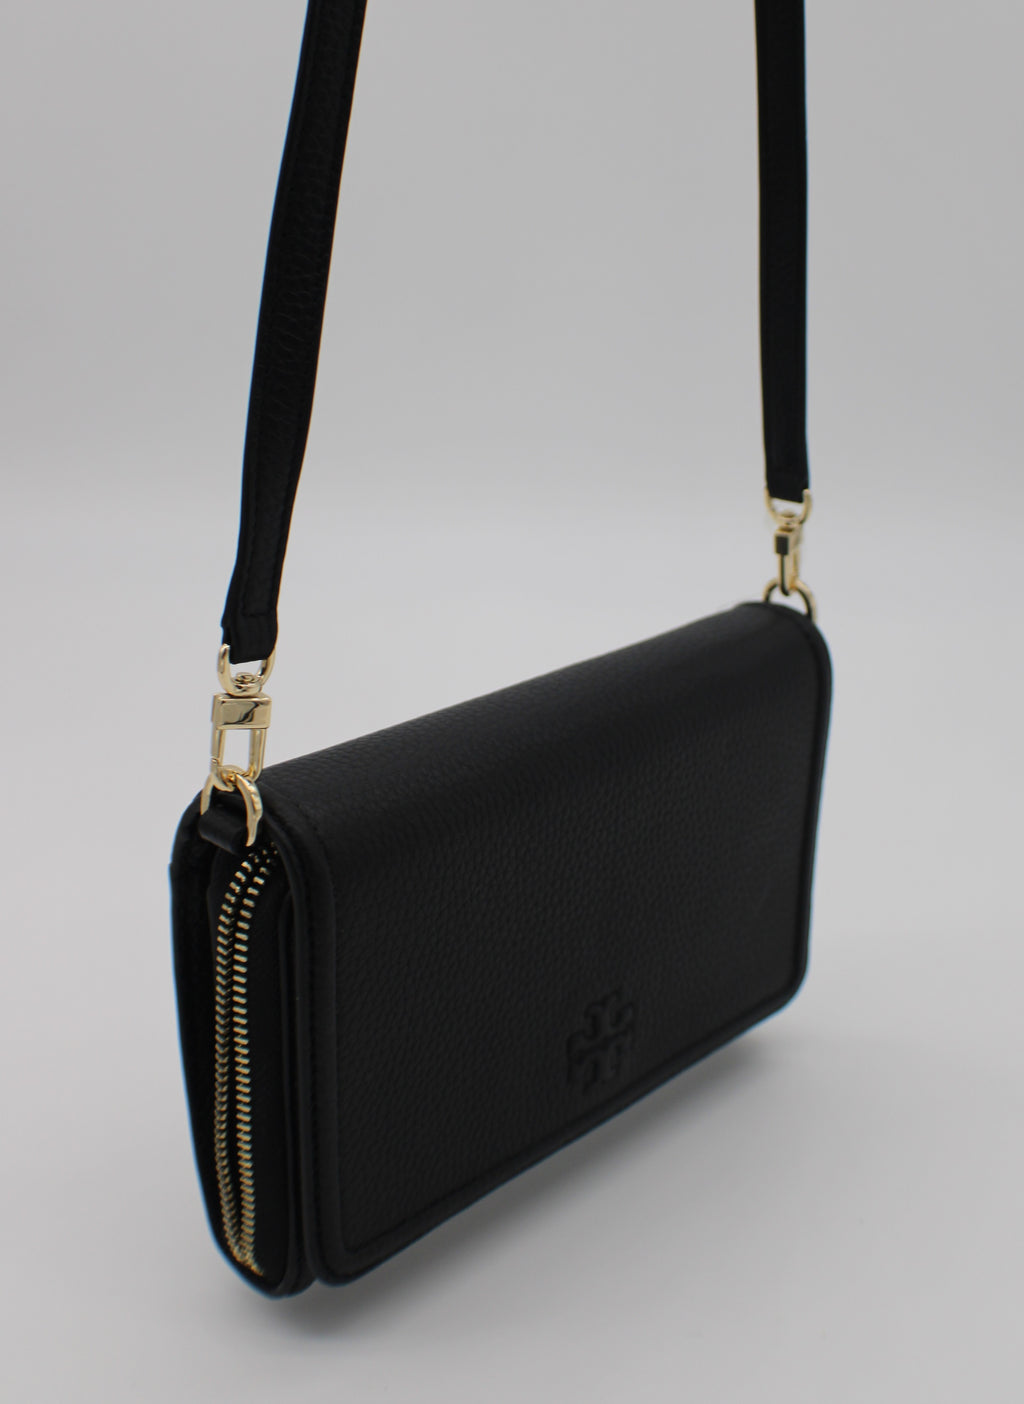 Tory Burch Thea Black Crossbody Bag Wallet Clutch Purse with Card Pouch  Case 192485578423